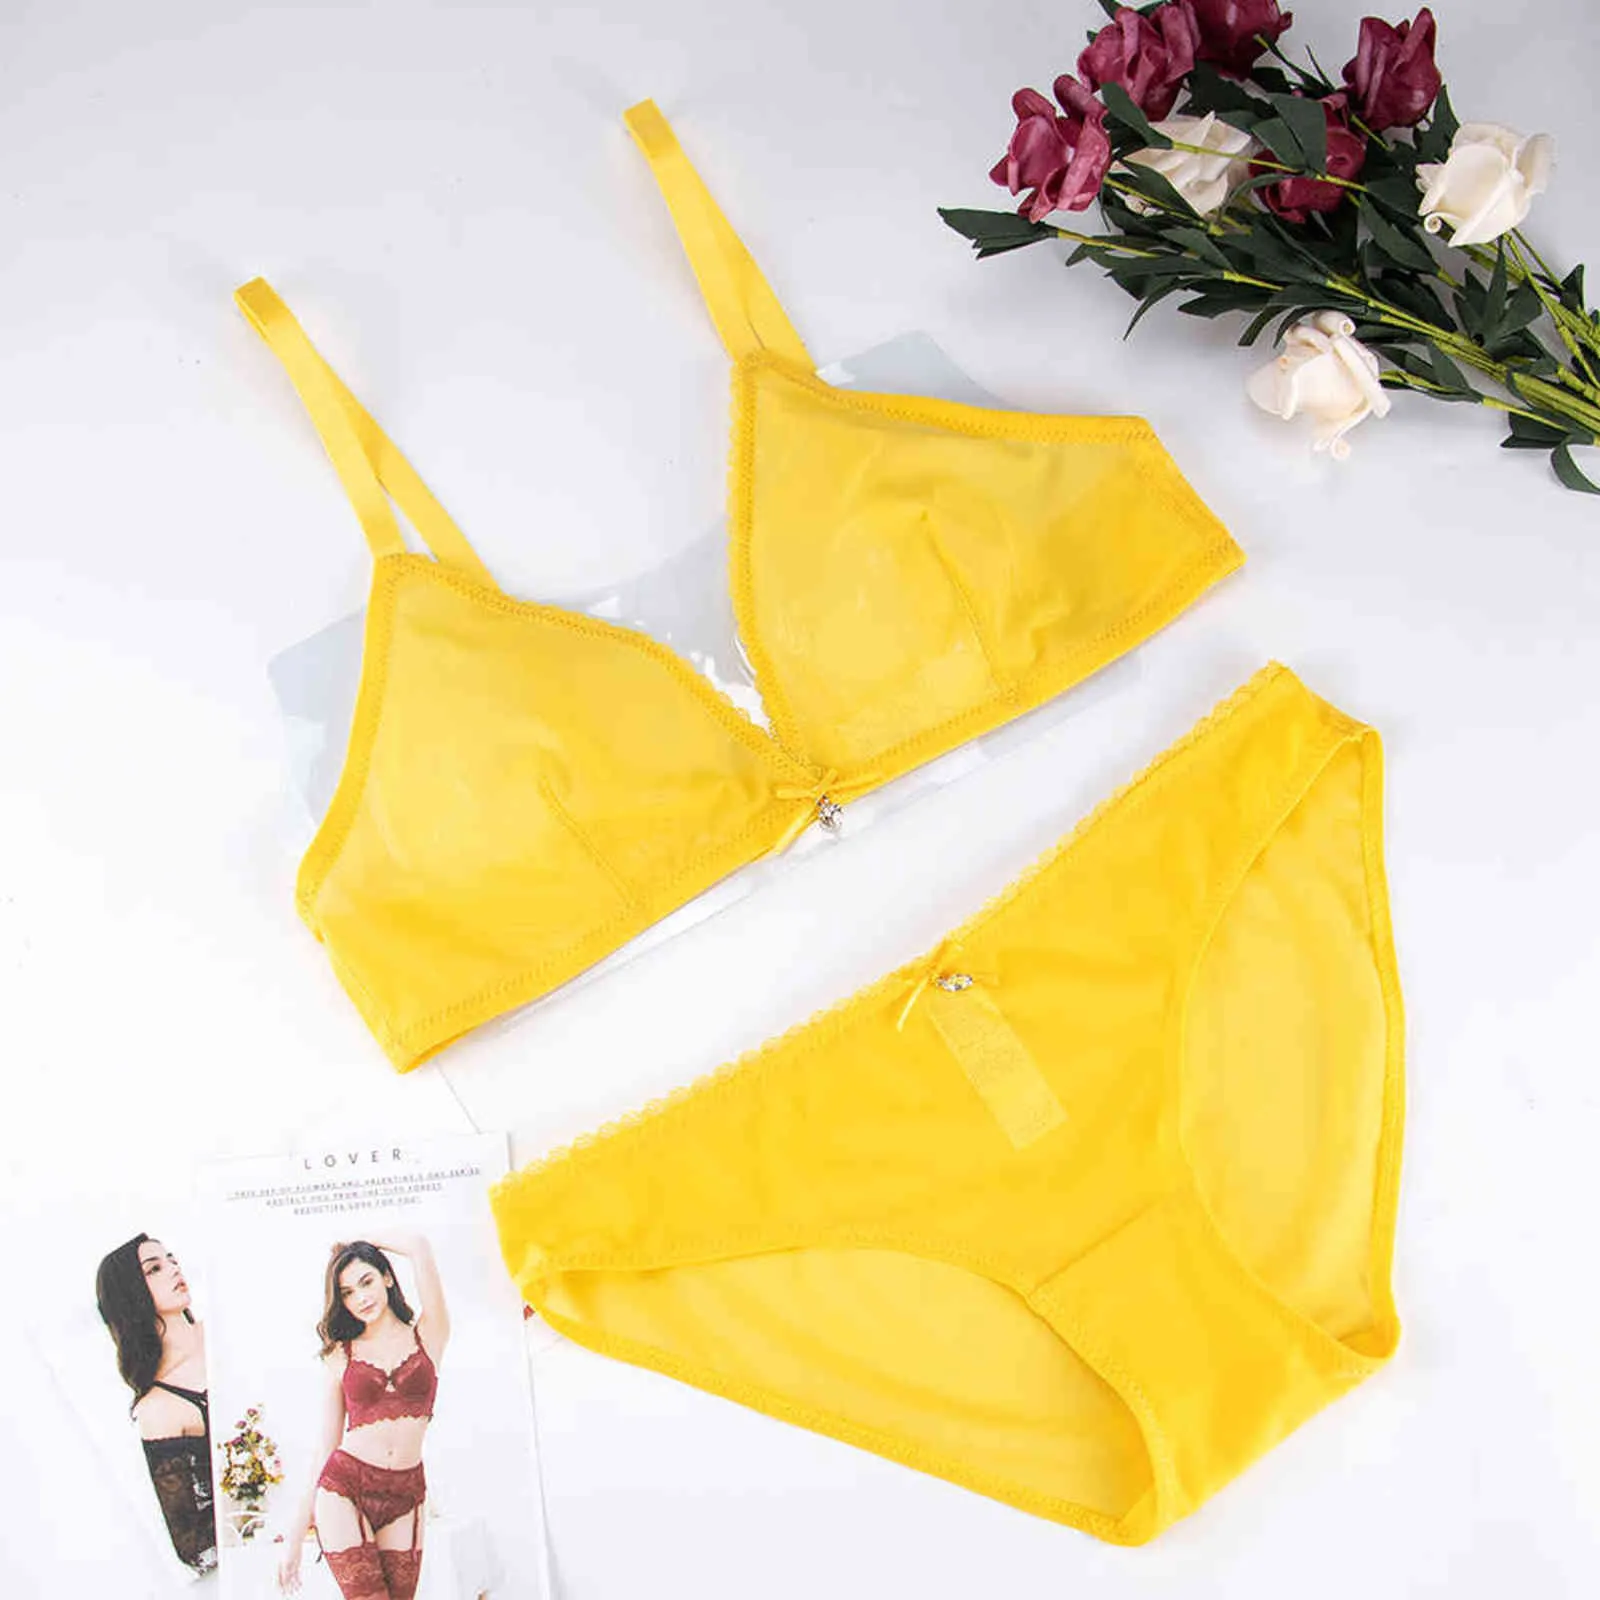 Women's Bras Yellow Wired Lingerie